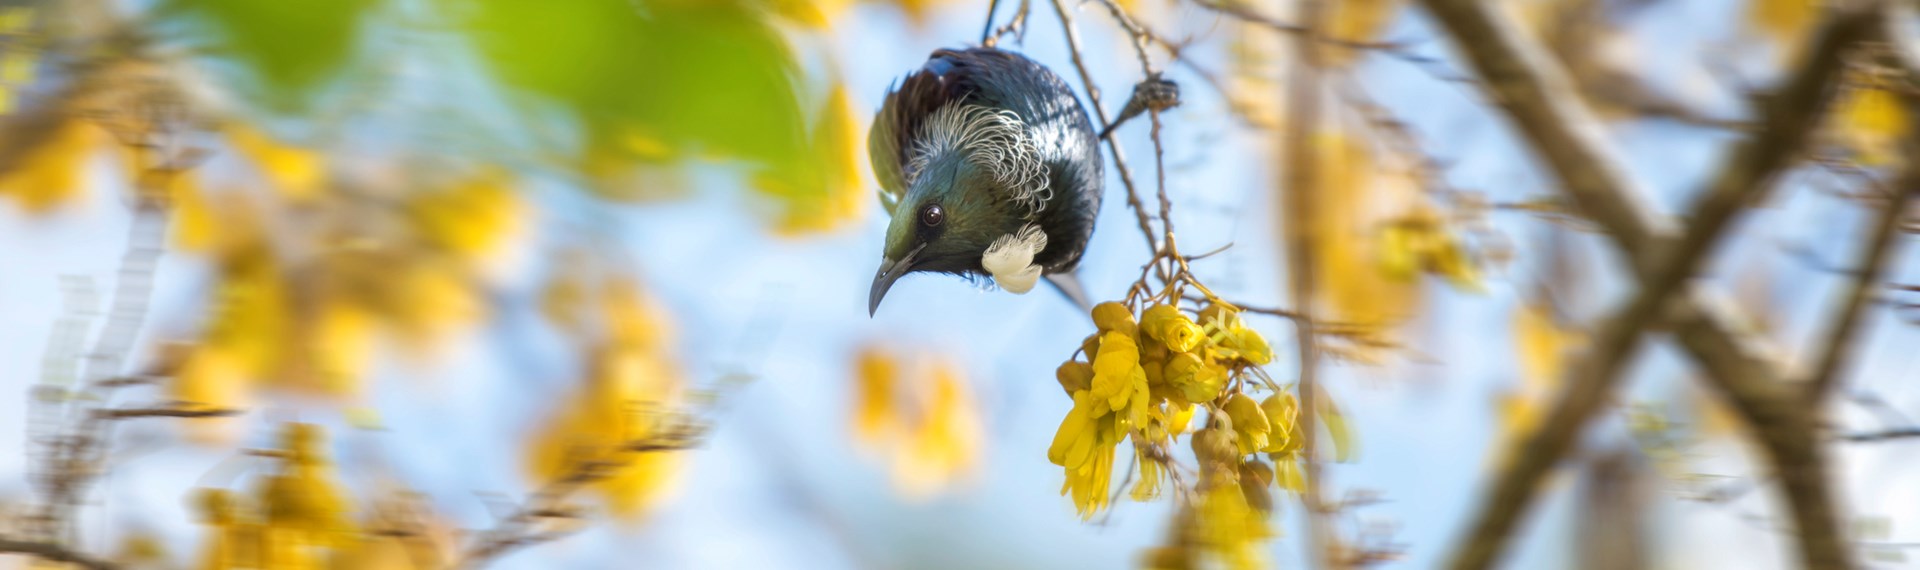 A native tui bird enjoys the bright yellow flowers of the native kowhai tree, in the Marlborough Sounds at the top of New Zealand's South Island.